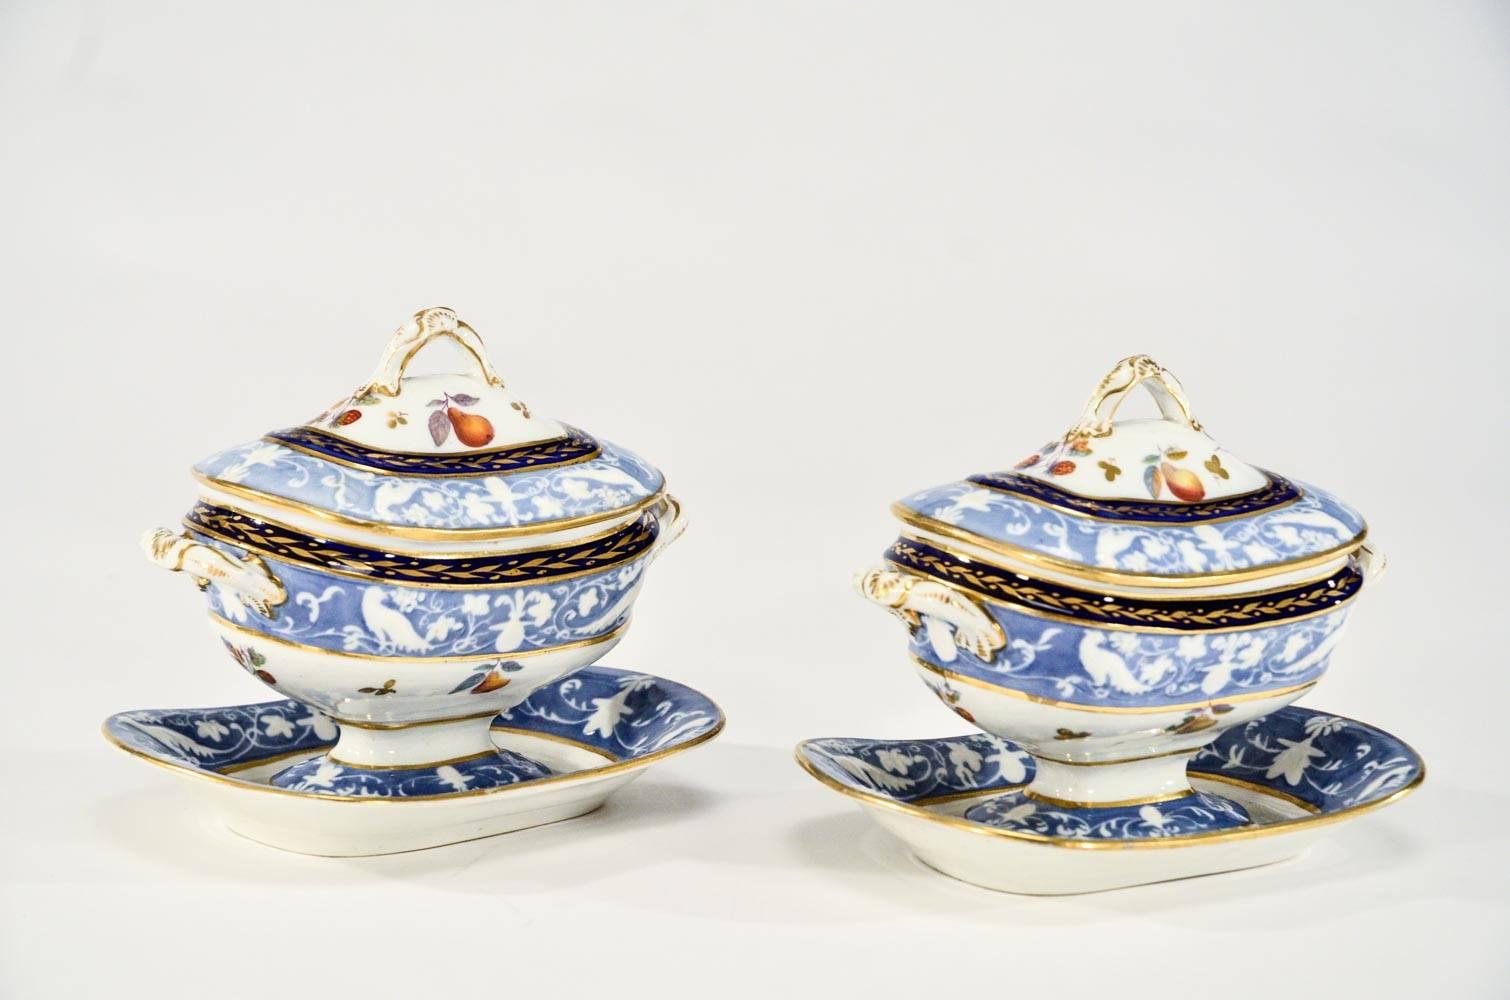 Pair of 19th Century Hand-Painted Spode Sauce Tureens For Sale